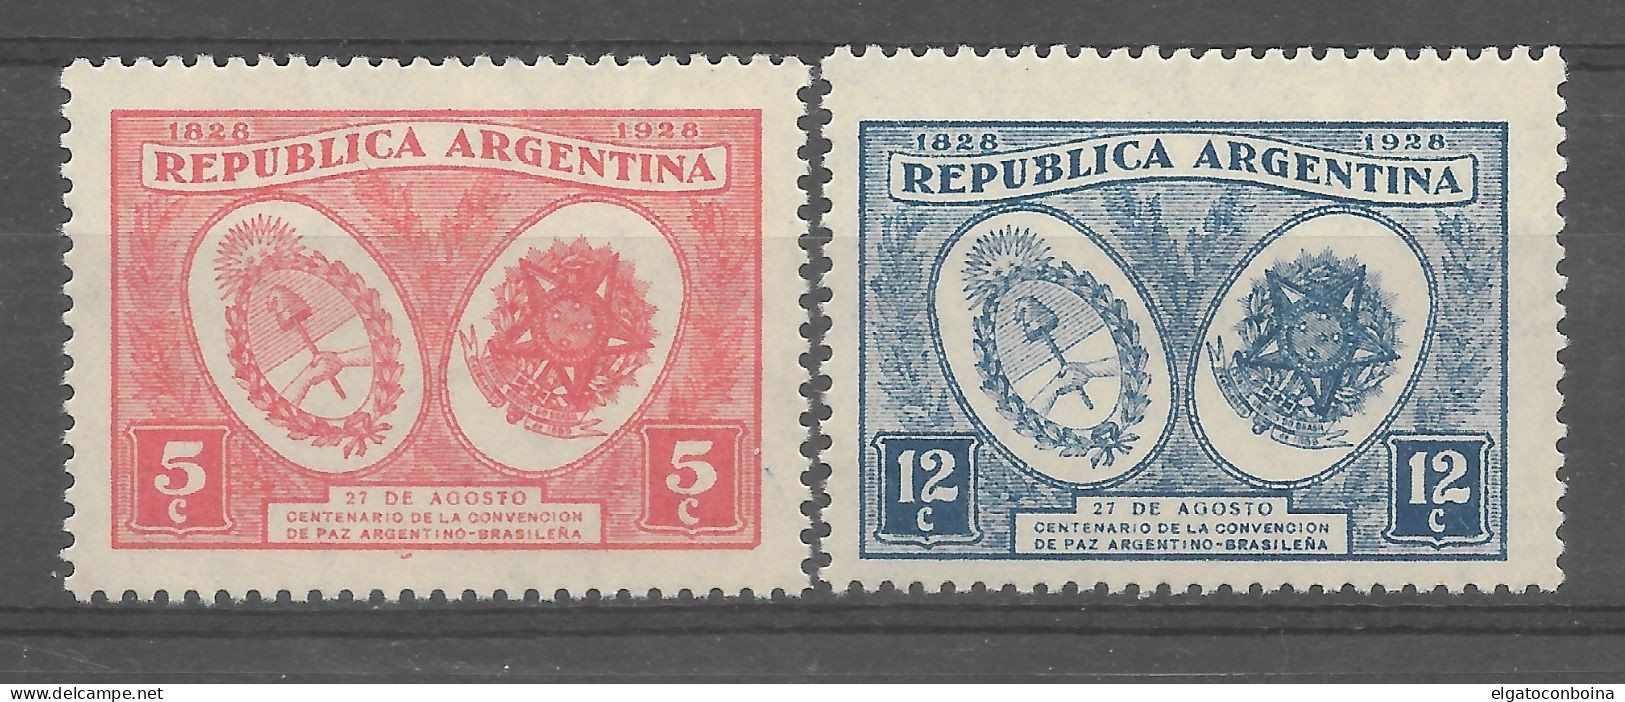 ARGENTINA 1928 CENTENARY OF PEACE TREATY WITH BRAZIL COATS NATIONAL EMBLEMS MNH - Unused Stamps